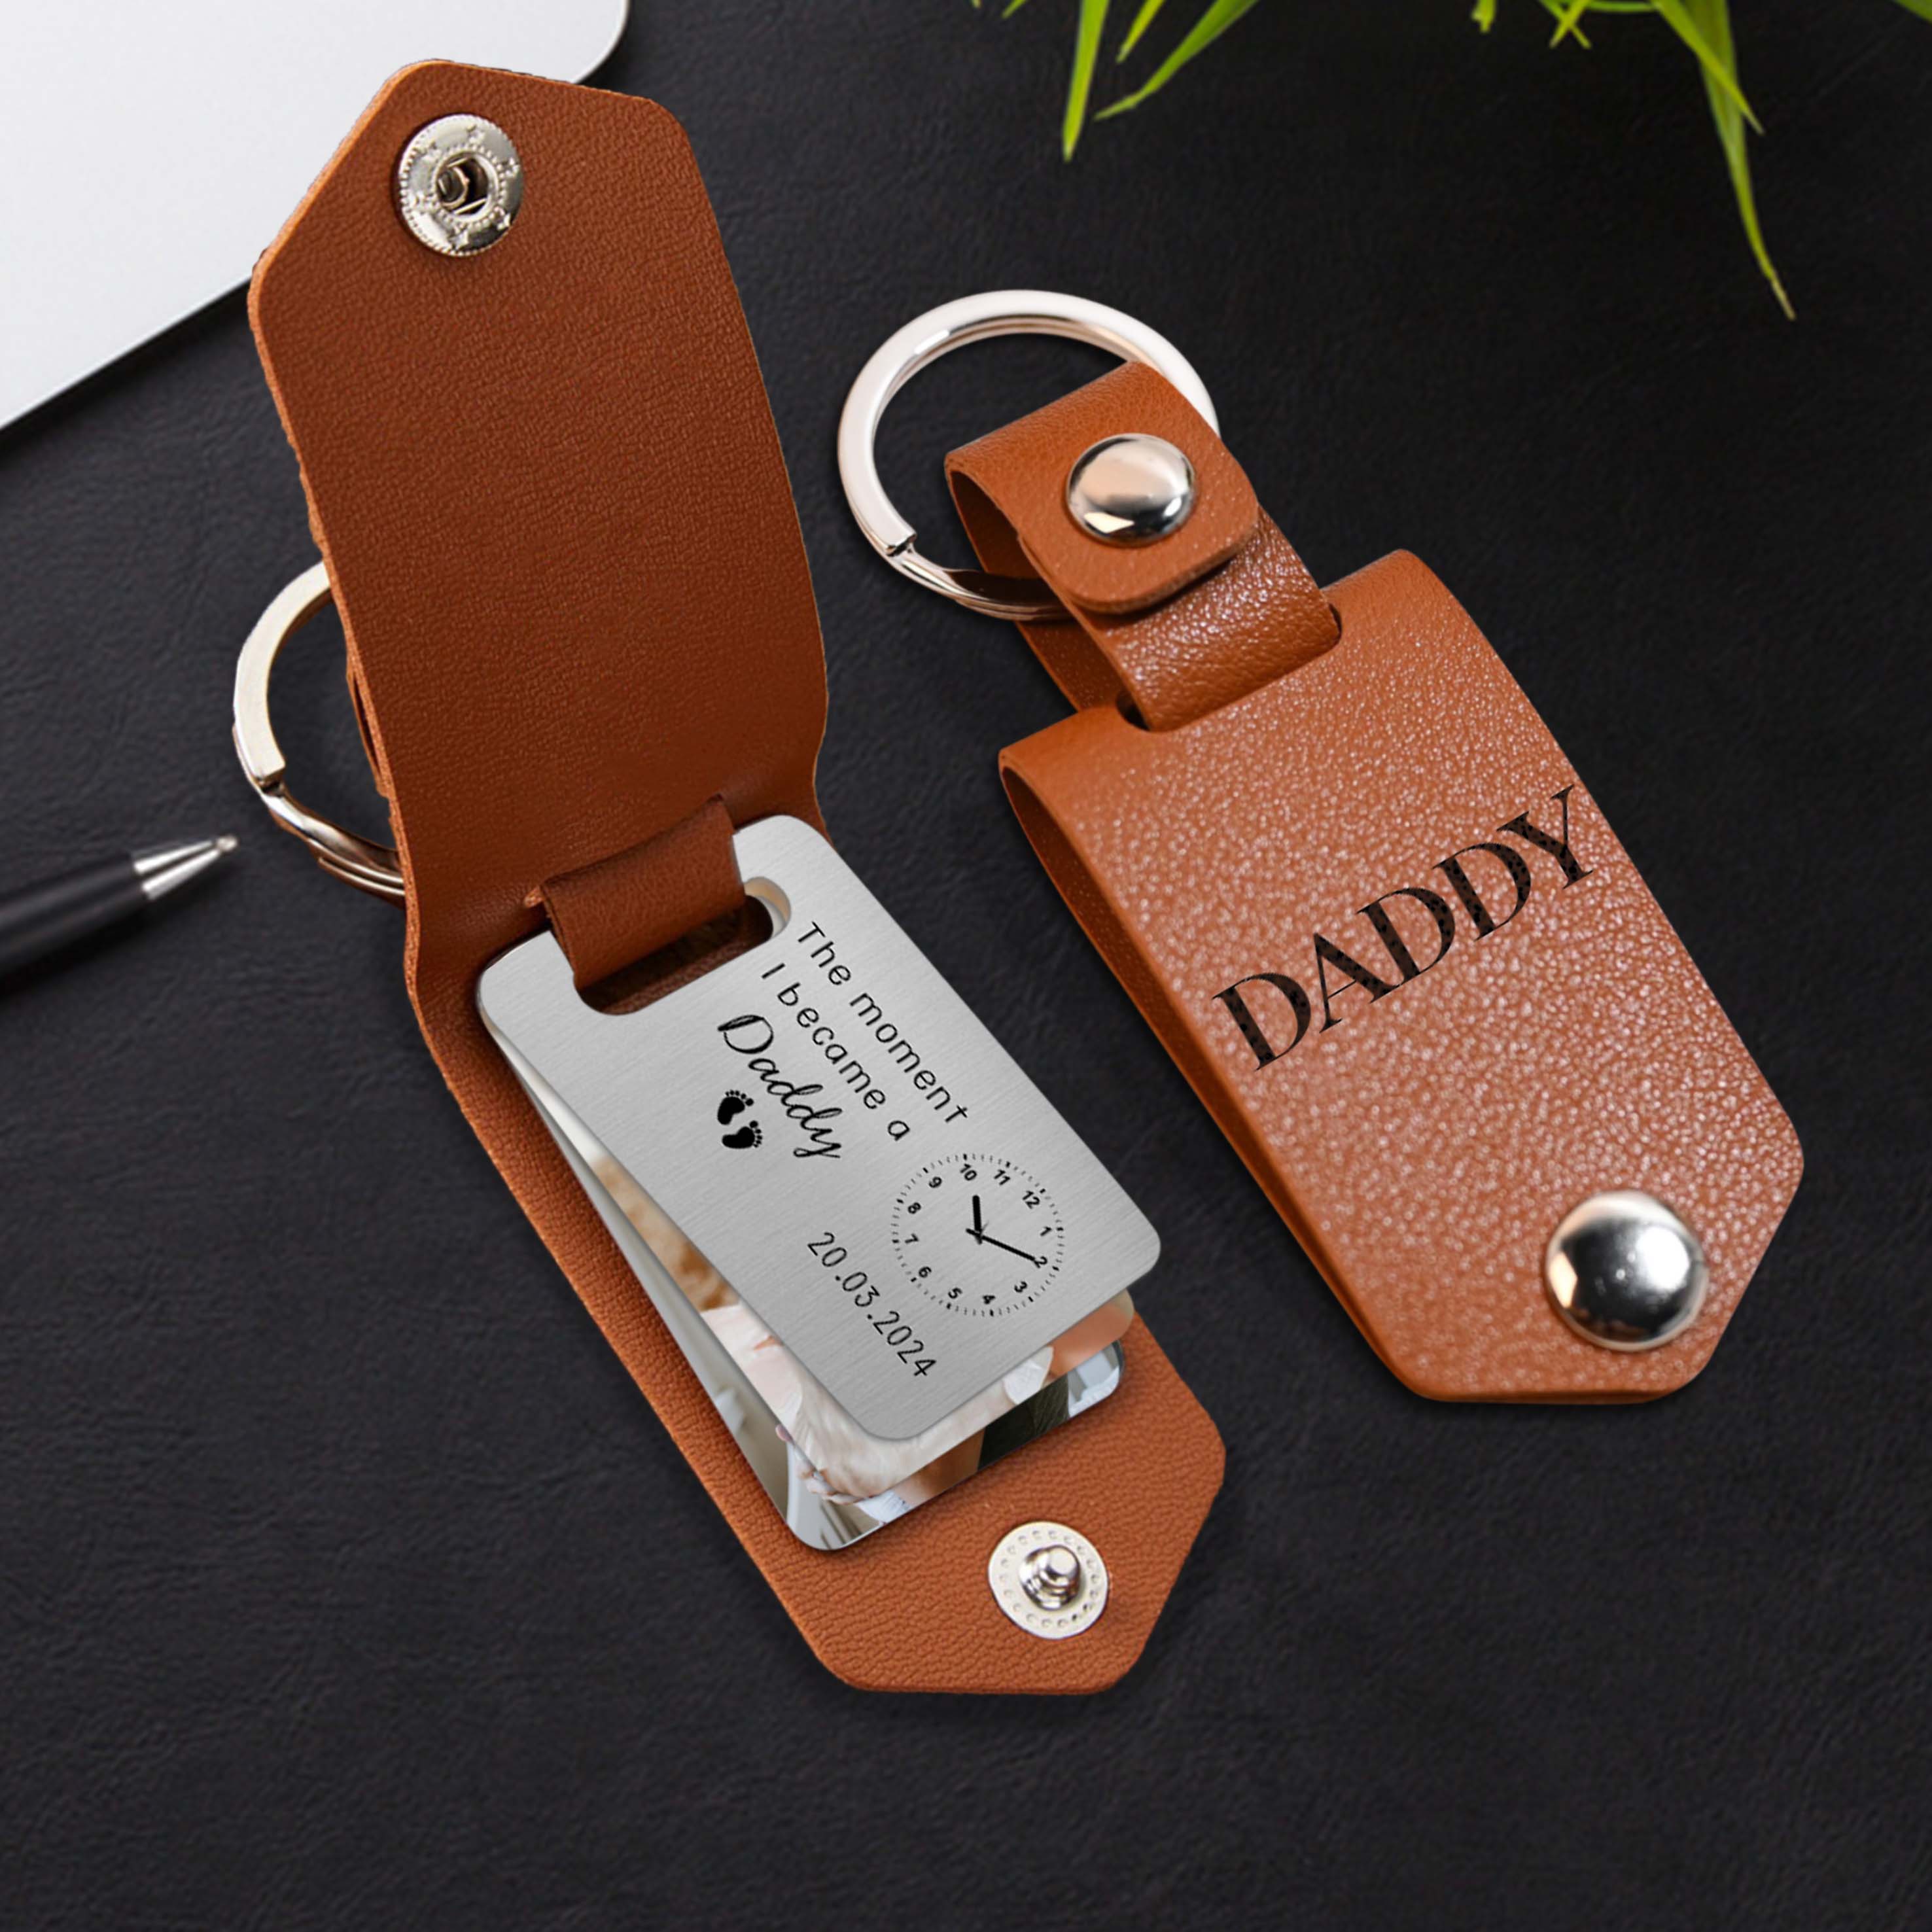 Father’s Day Keychain With Picture